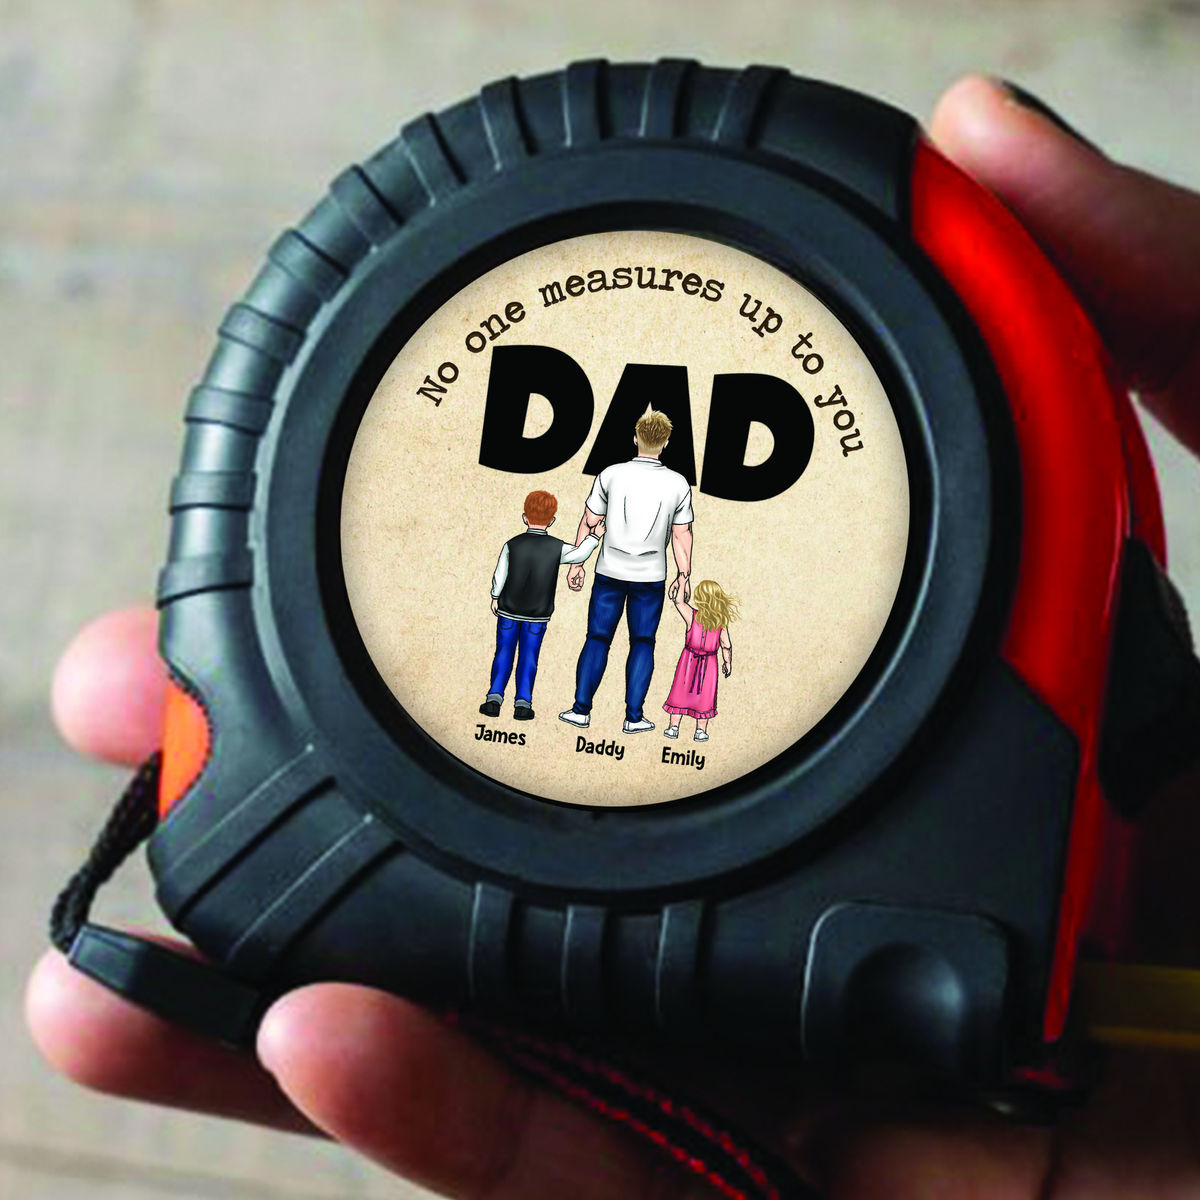 Personalized Tape Measure - No one measures up to you Dad (29248)